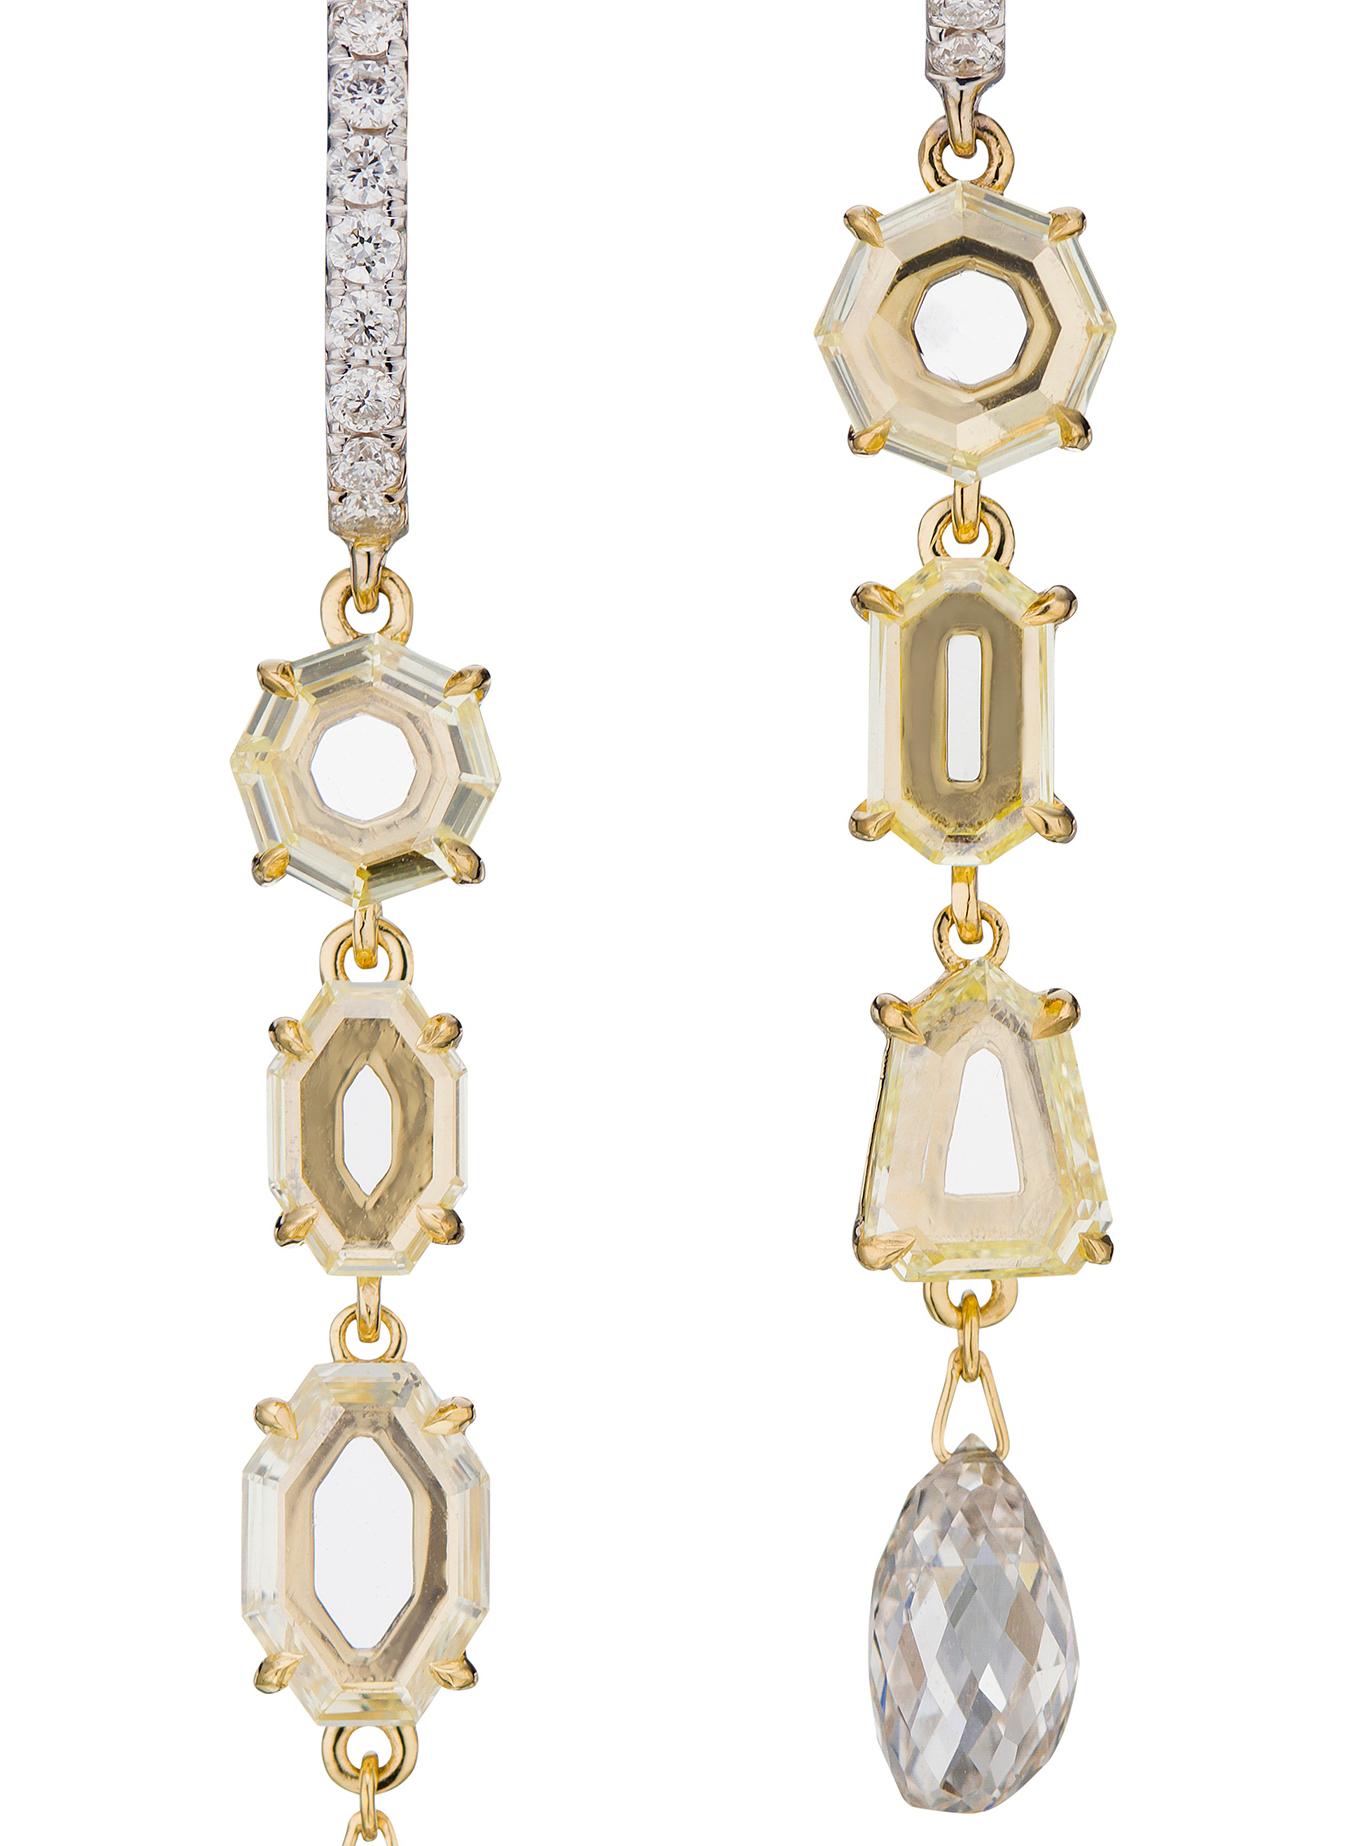 Rosecut fancy yellow VS diamonds briolet white SI diamonds and round diamonds lined in 18k yellow gold